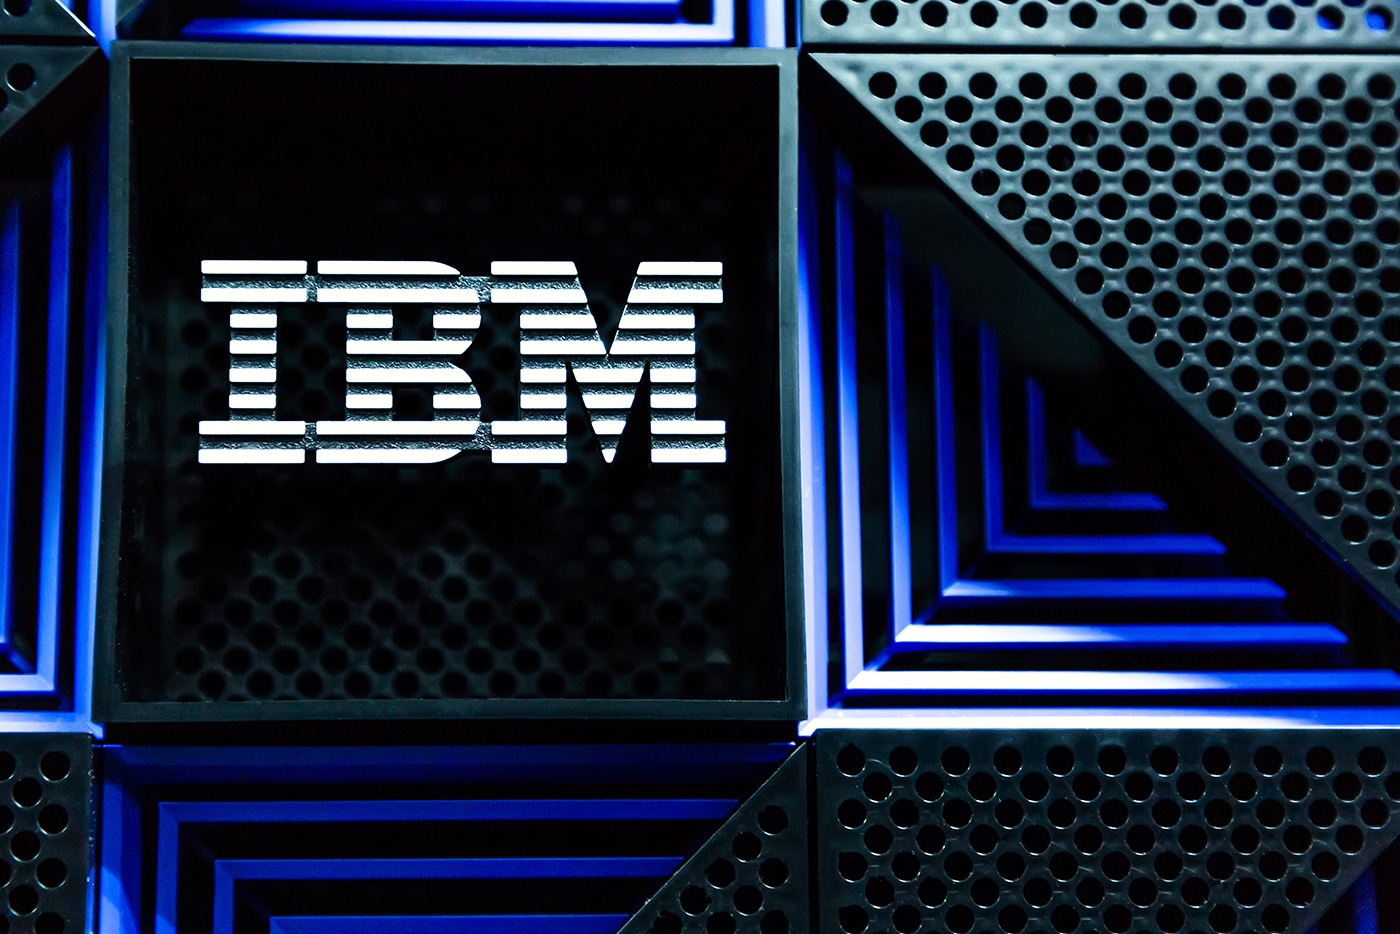 How Strategic Partnerships Help IBM Deliver AI And Hybrid Cloud To Customers | Bernard Marr